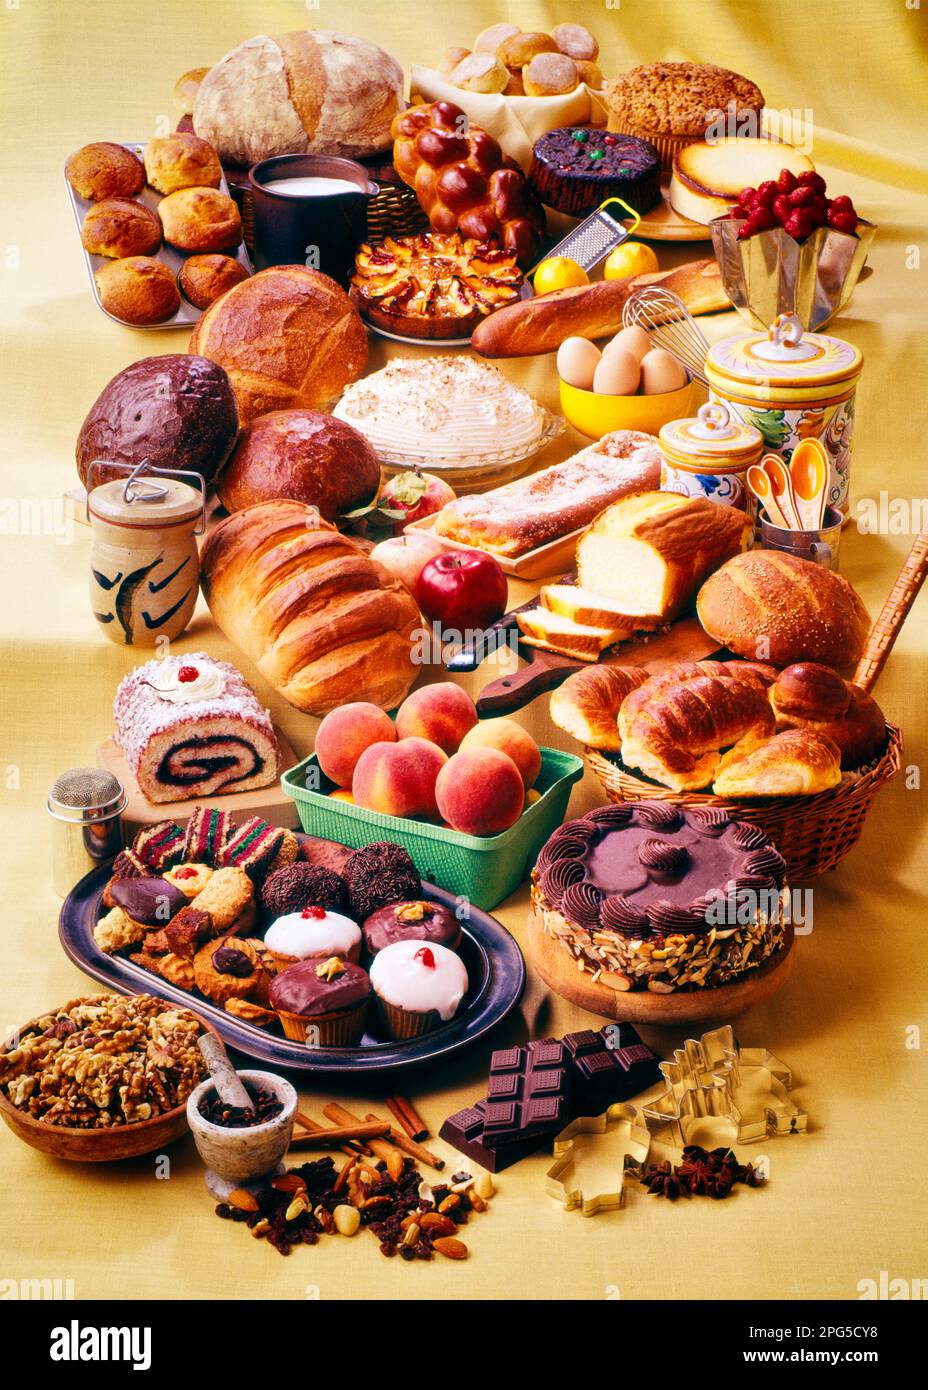 1980s LARGE ASSORTMENT OF BAKERY GOODS BREADS CAKES PIES ROLLS DONUTS COOKIES AND INGREDIENTS EGGS CHOCOLATE FRUIT NUTS  - kf12954 PHT001 HARS POUND CAKE ASSORTMENT OLD FASHIONED Stock Photo